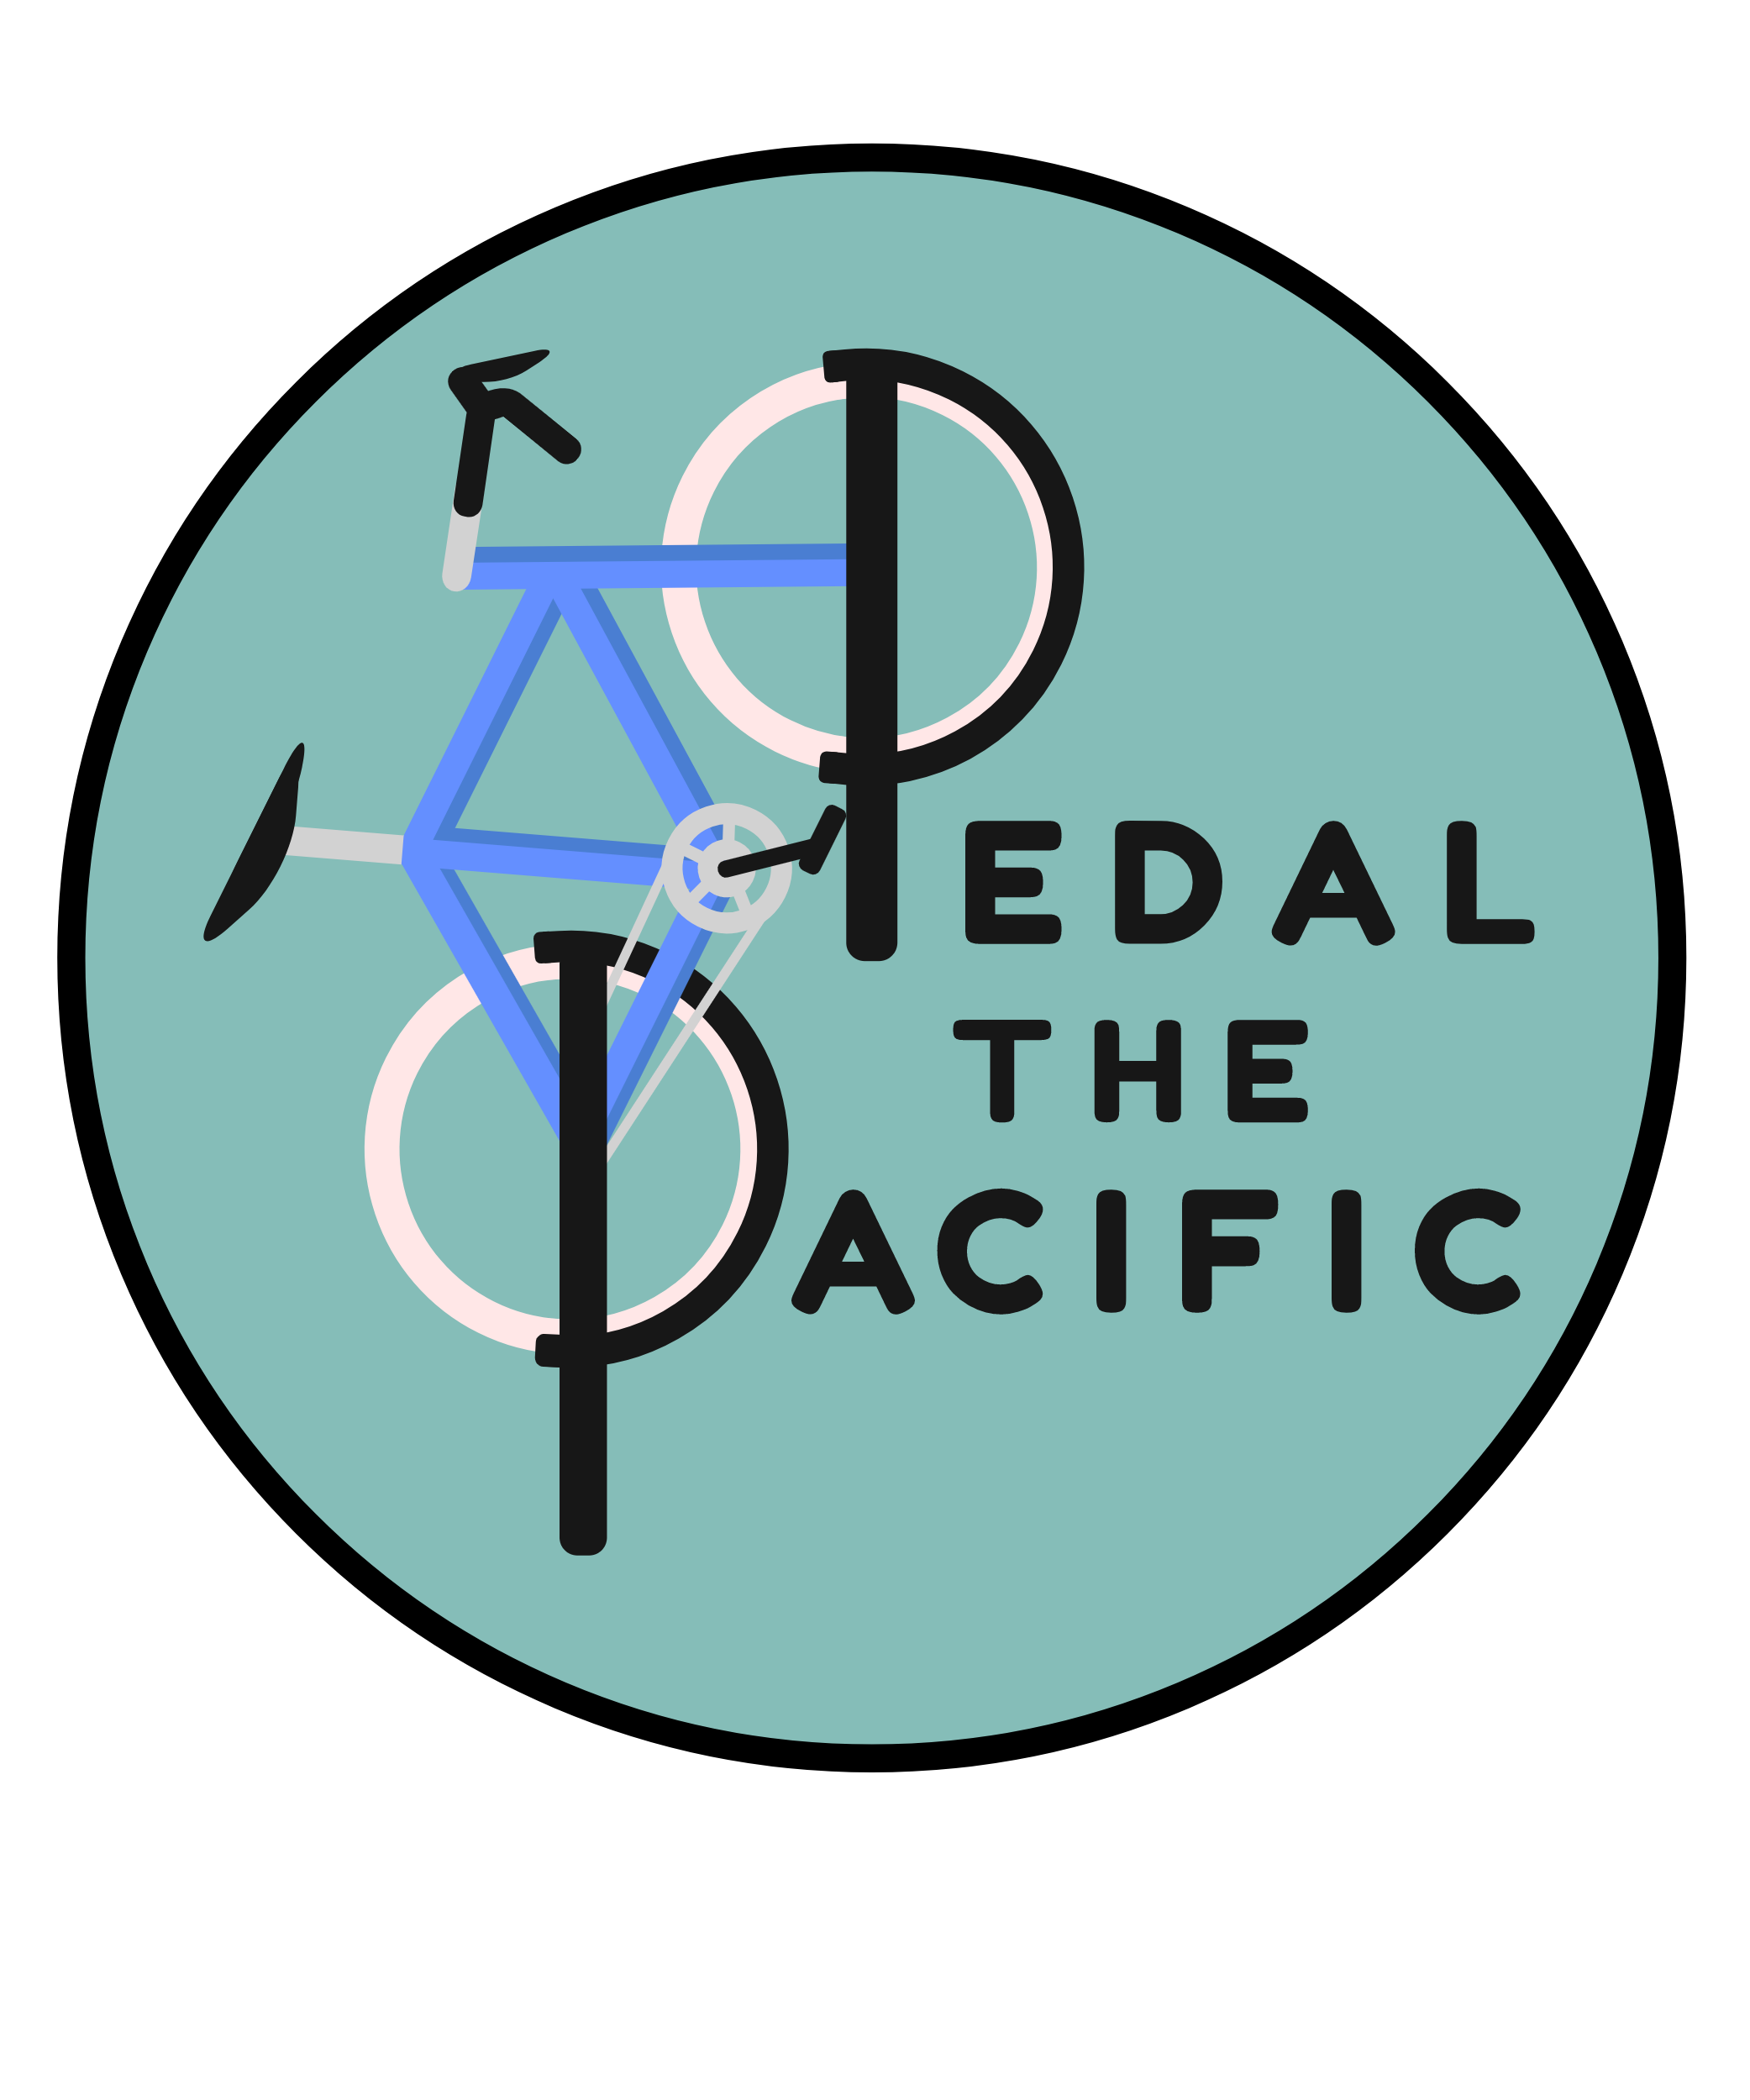 Pedal the Pacific logo